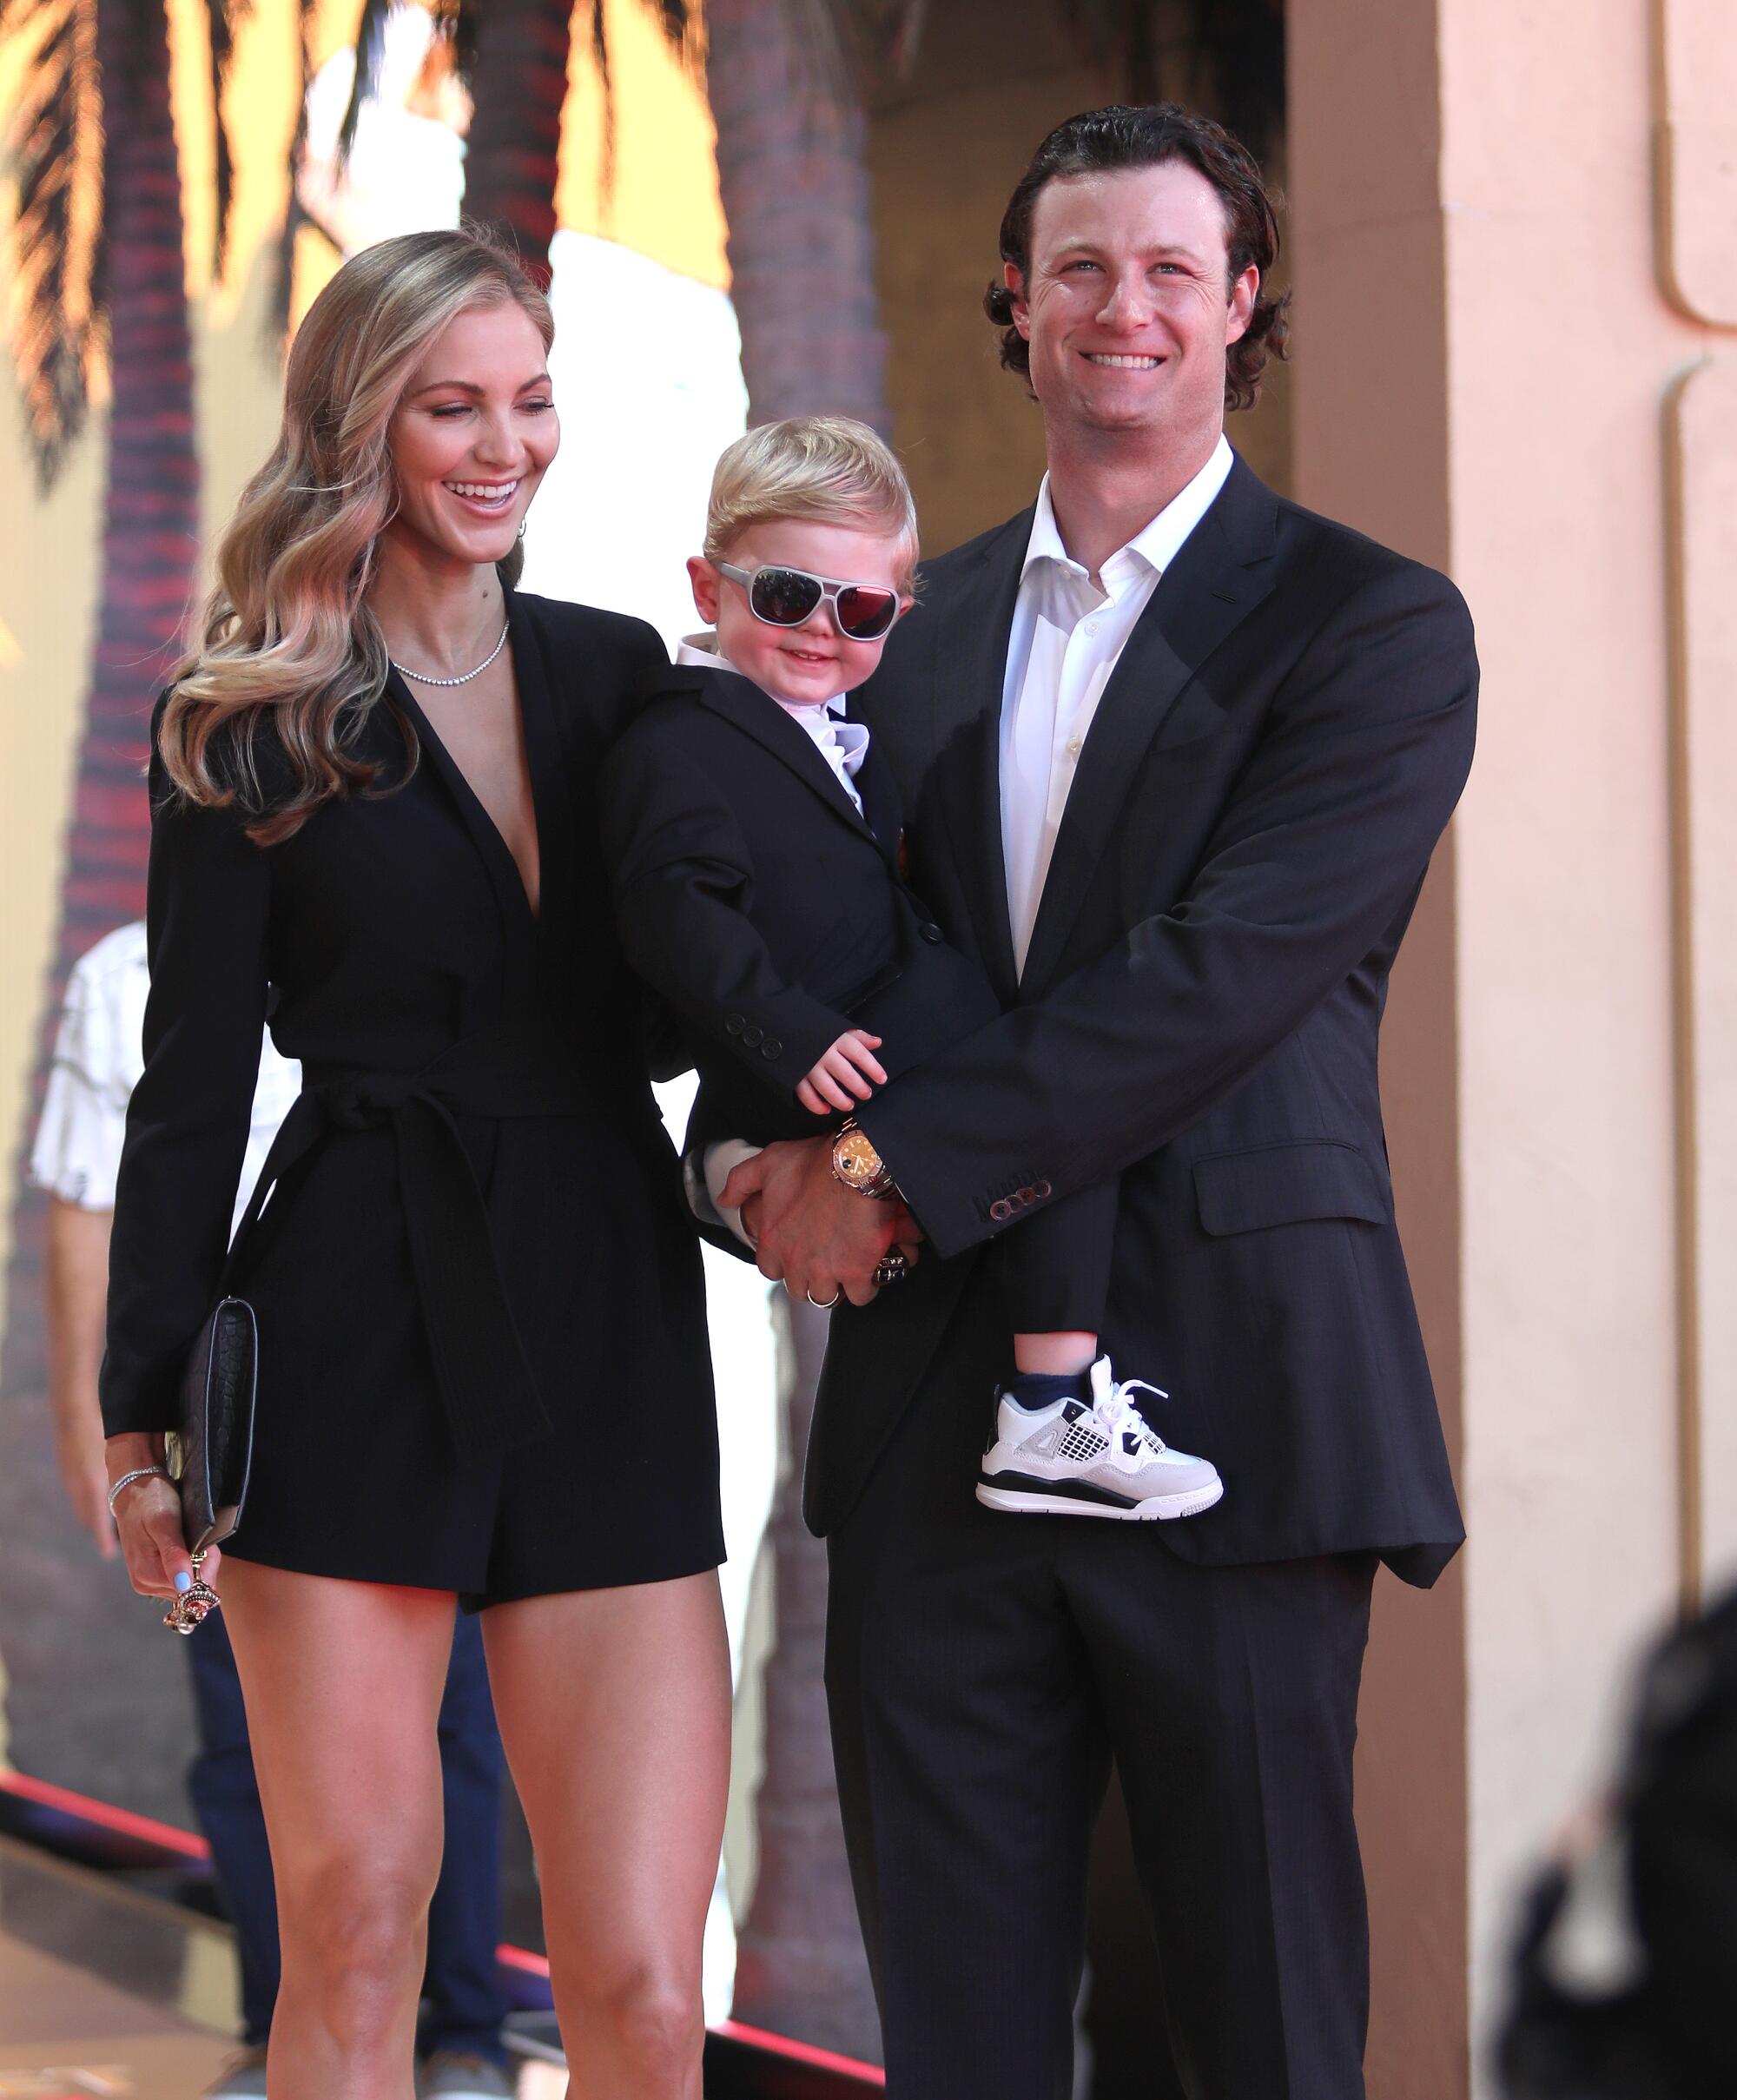 New York Yankees pitcher Gerrit Cole in a black suit arrives with his family at the 2022 MLB All-Star Game Red Carpet Show.